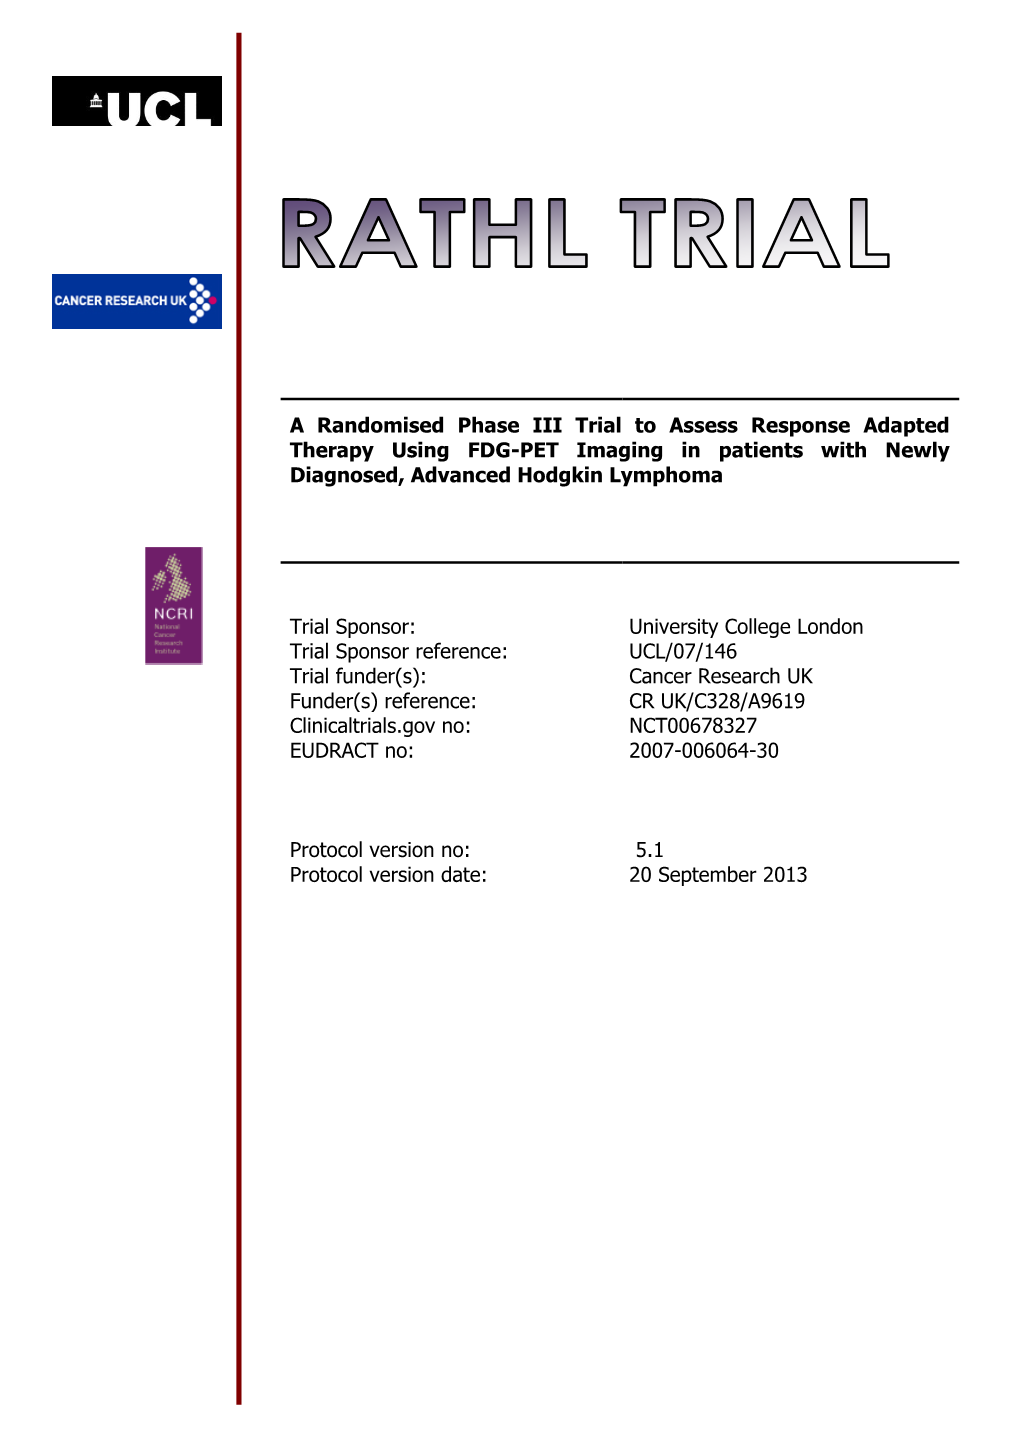 A Randomised Phase III Trial to Assess Response Adapted Therapy Using FDG-PET Imaging in Patients with Newly Diagnosed, Advanced Hodgkin Lymphoma